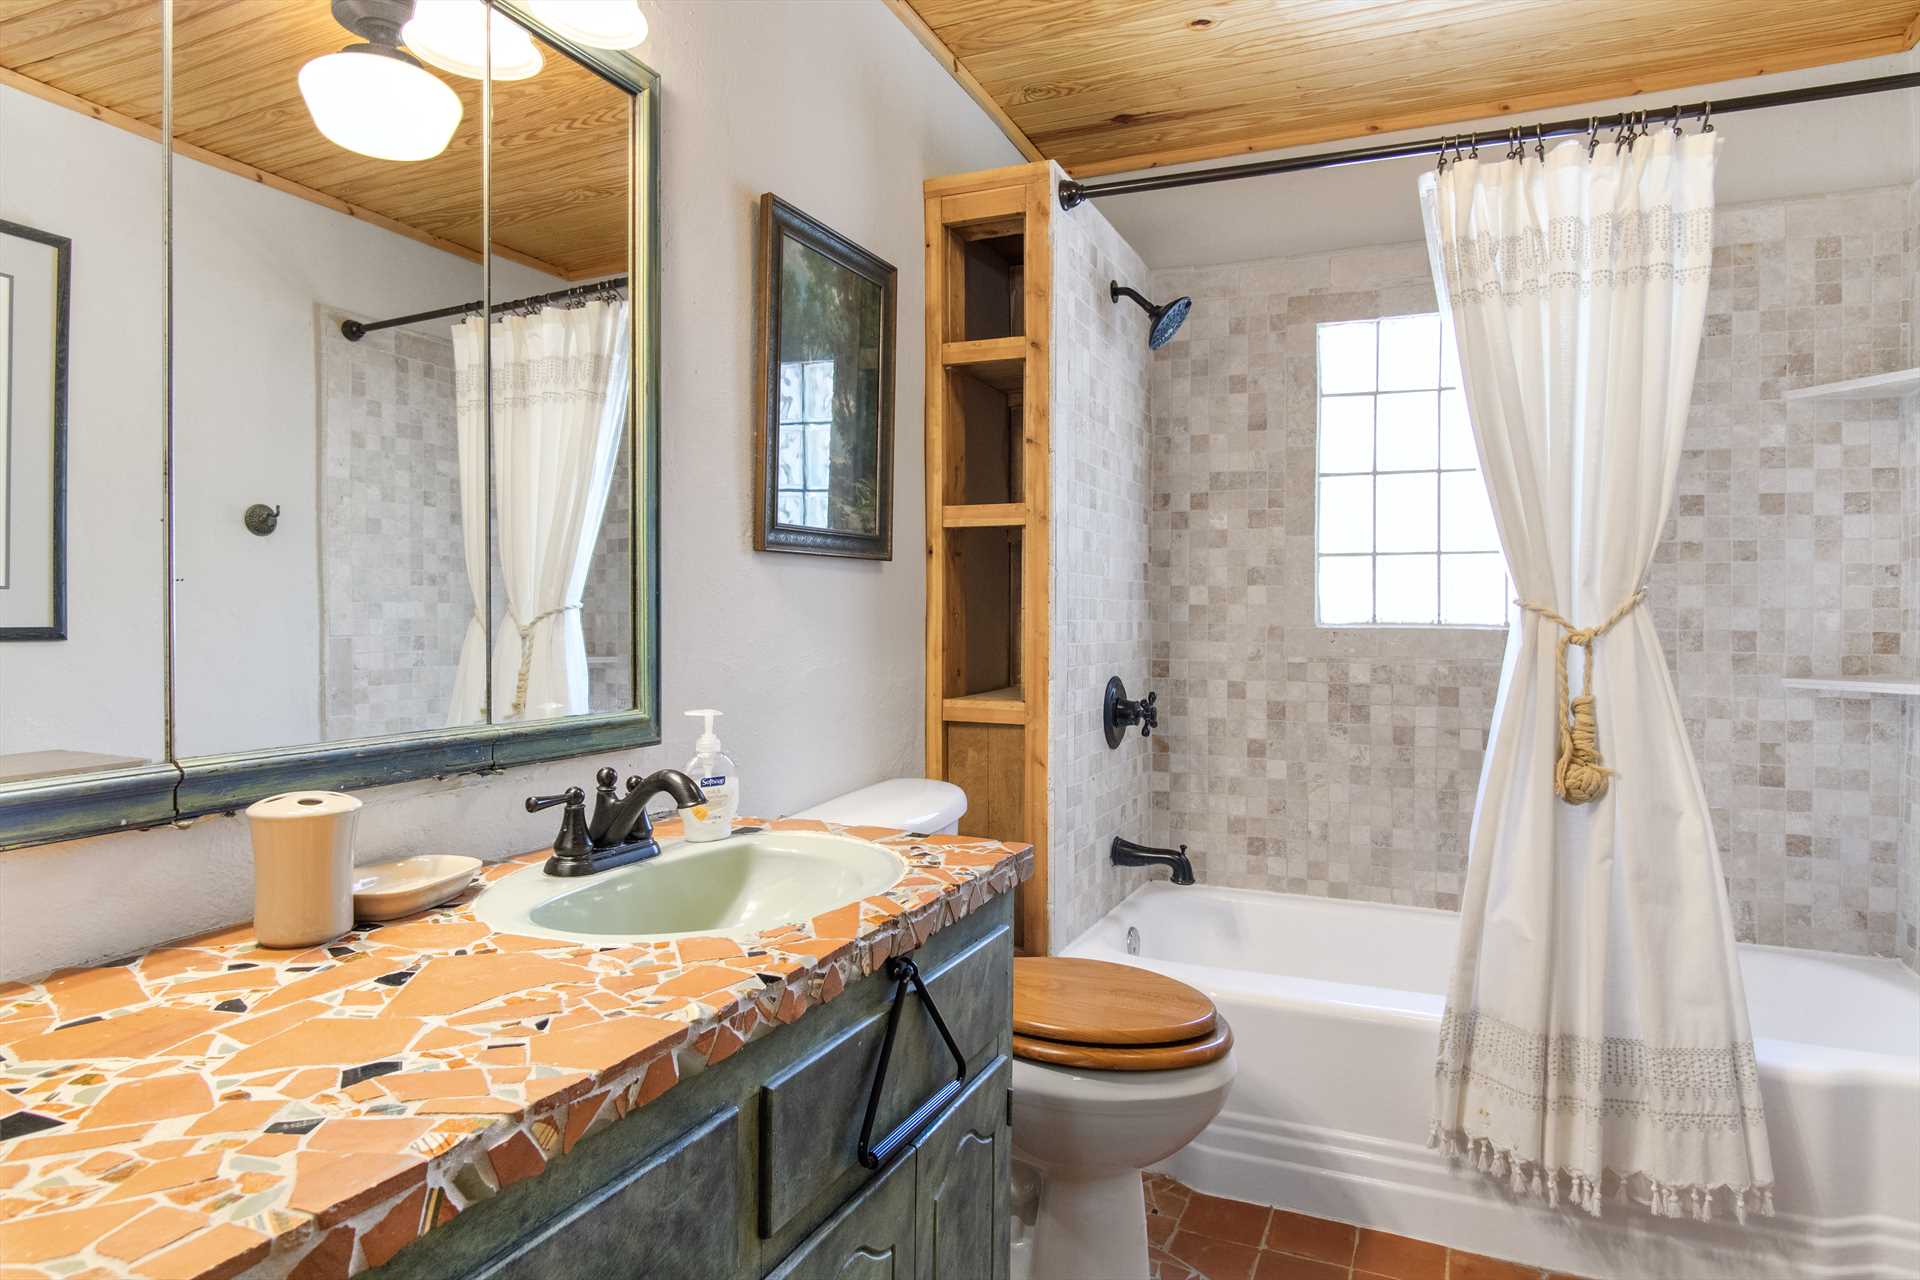                                                 This is just one of the three full baths here, featuring a roomy vanity and shower/tub combo.